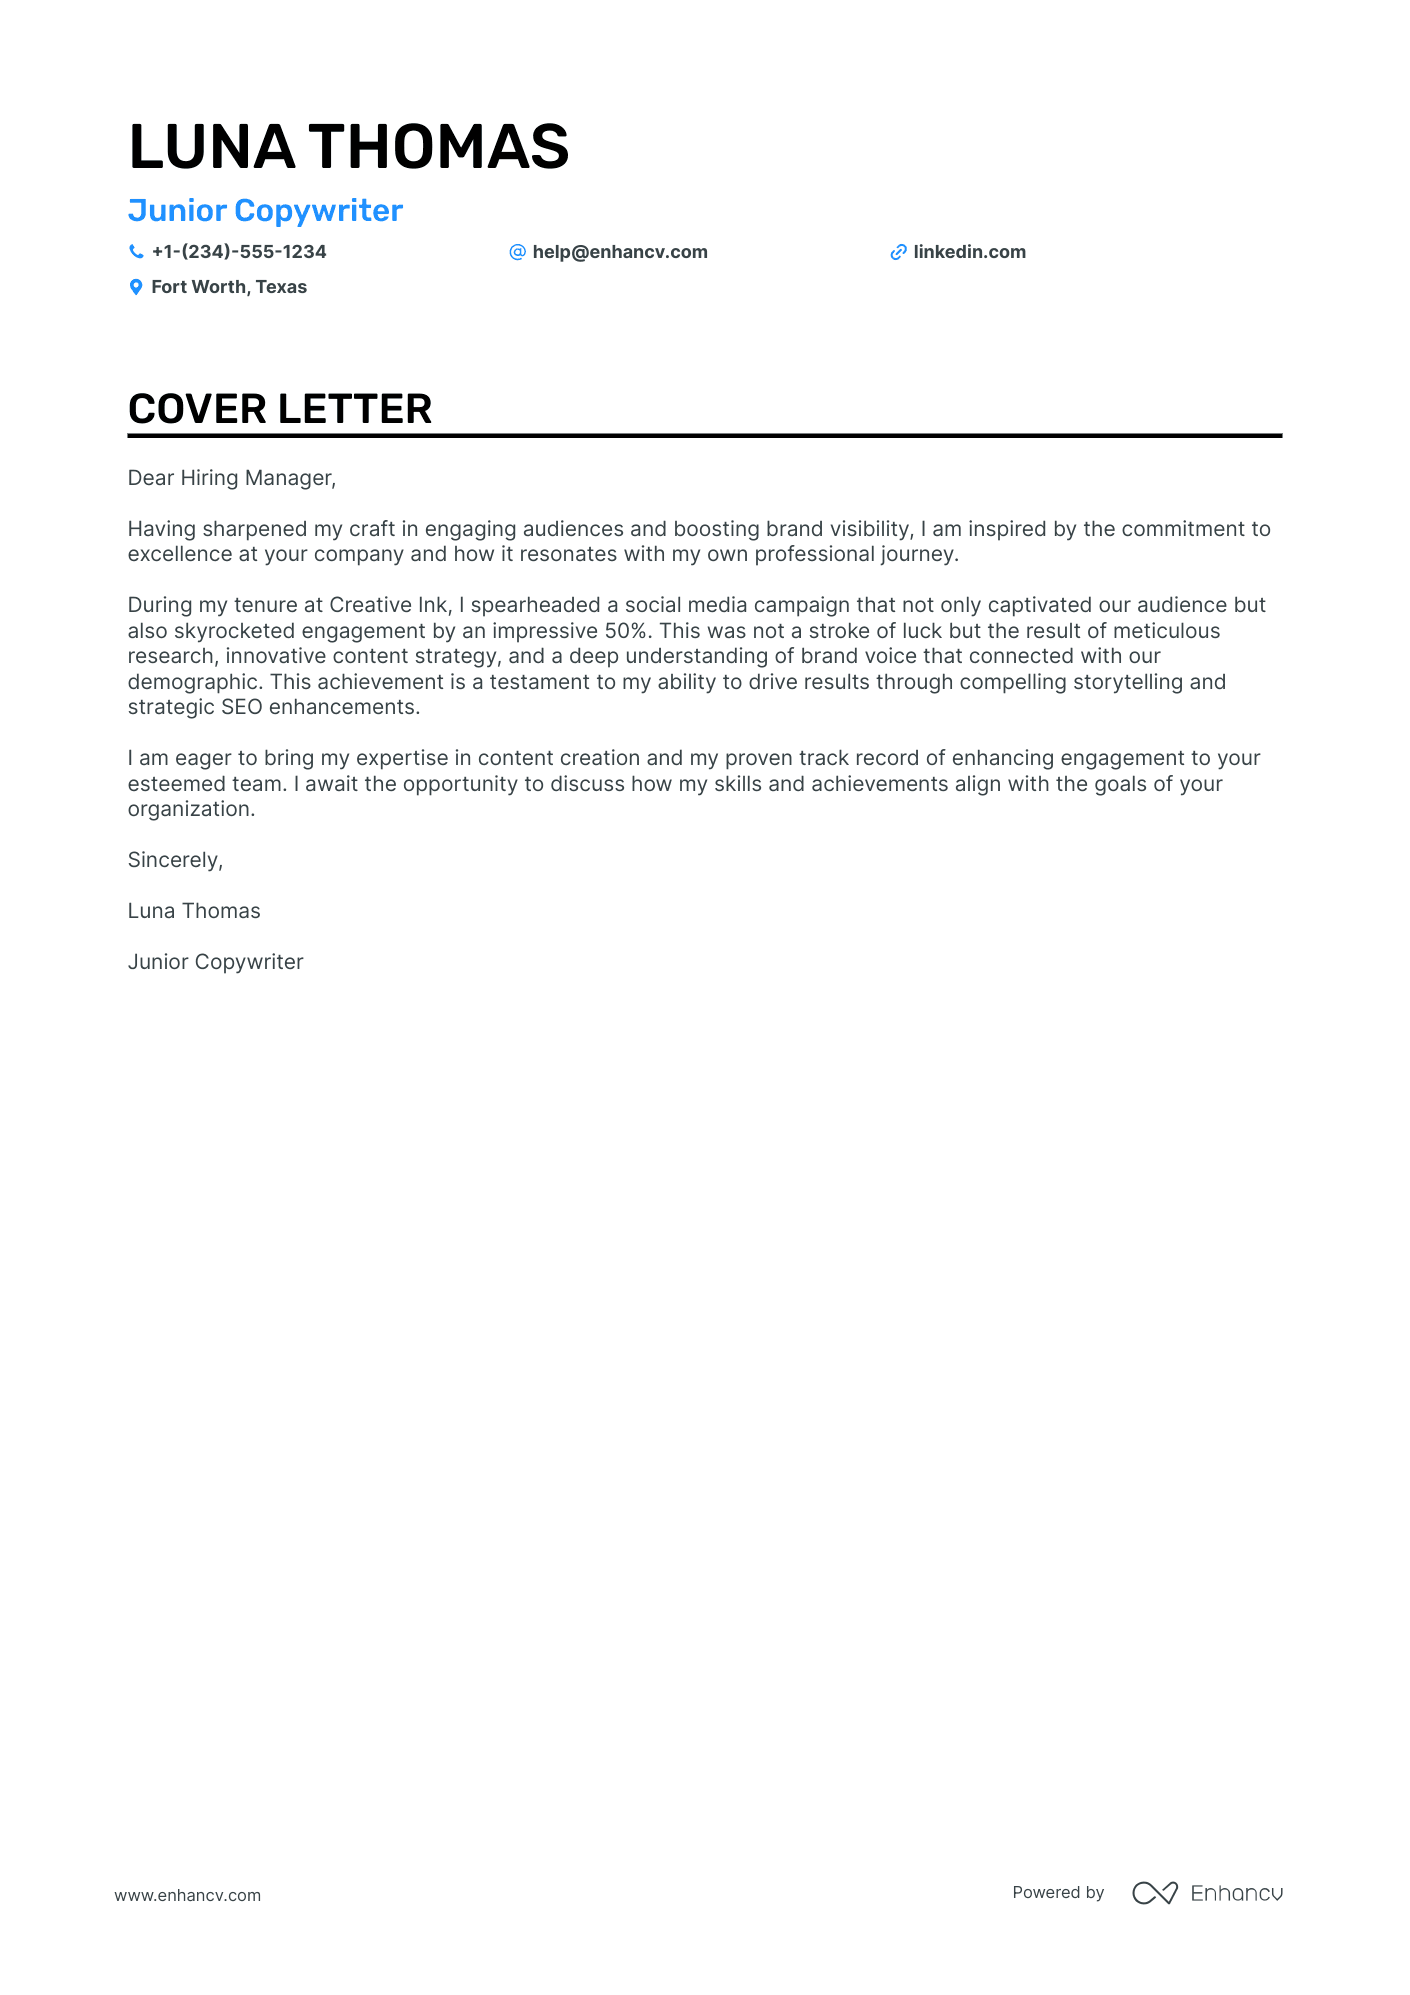 copywriter cover letter no experience